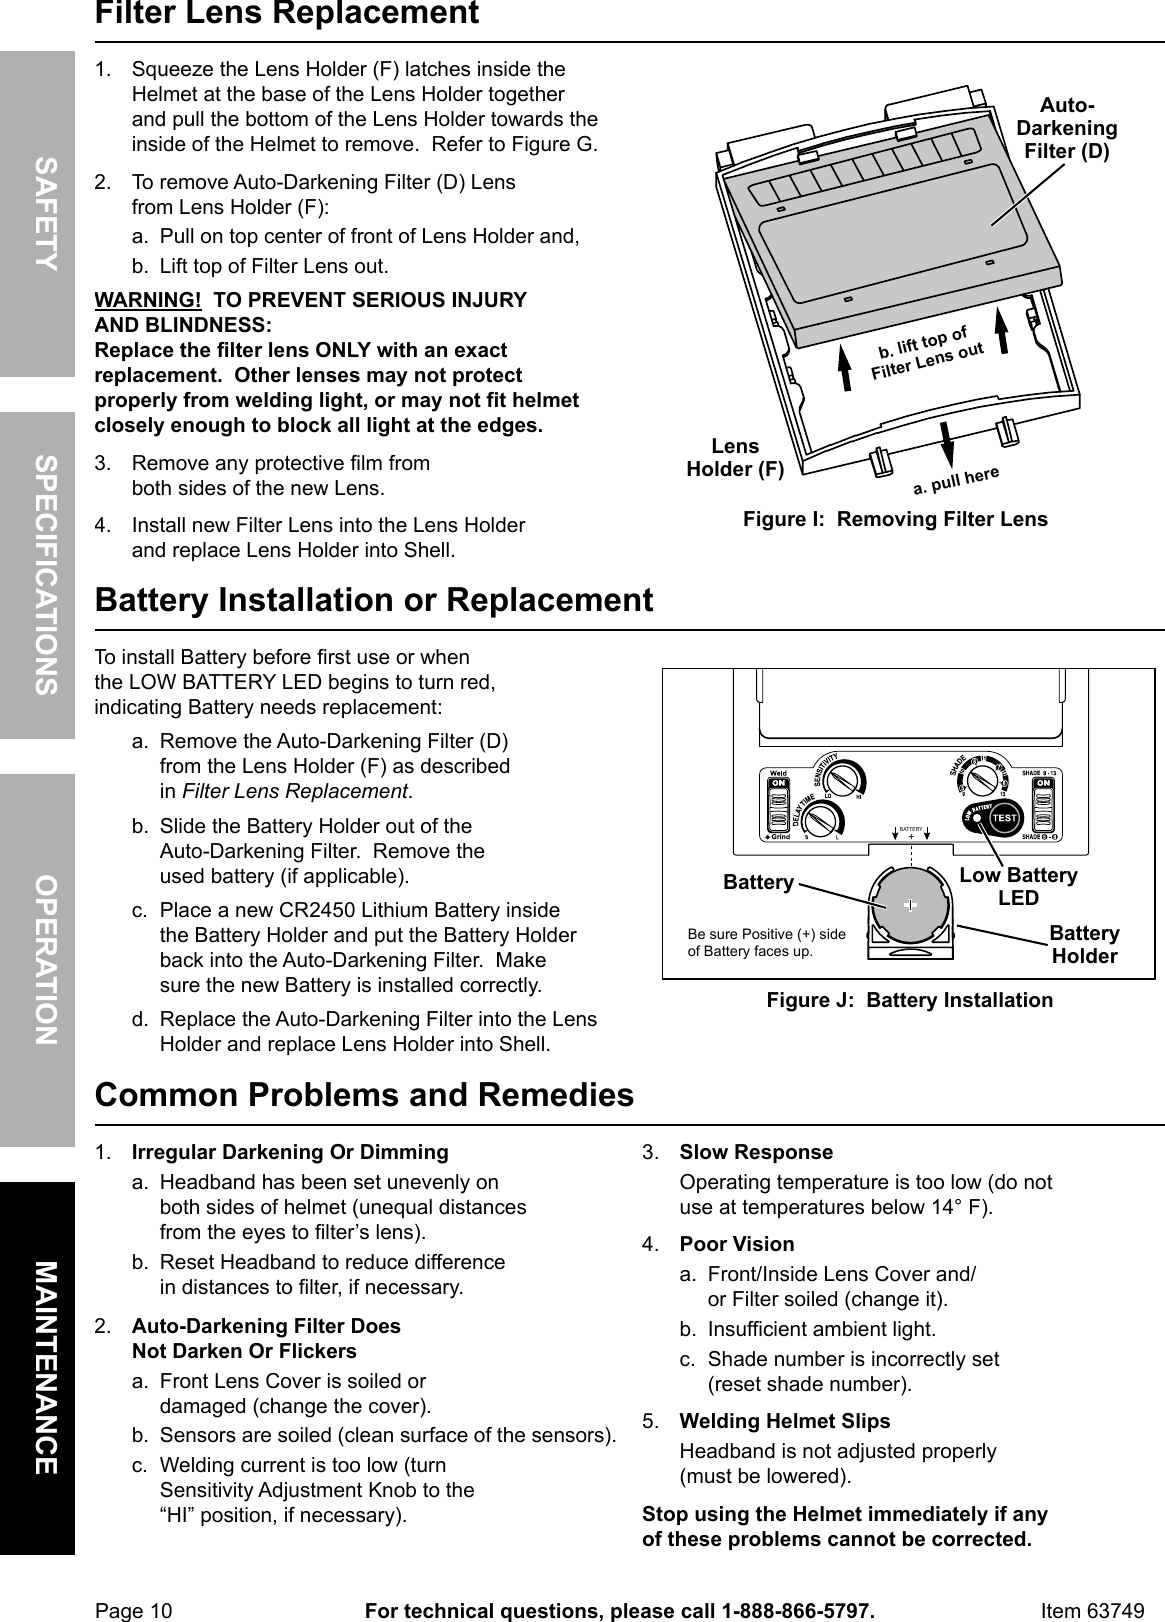 Page 10 of 12 - Manual For The 63749 Arc Safe™ Auto Darkening Welding Helmet